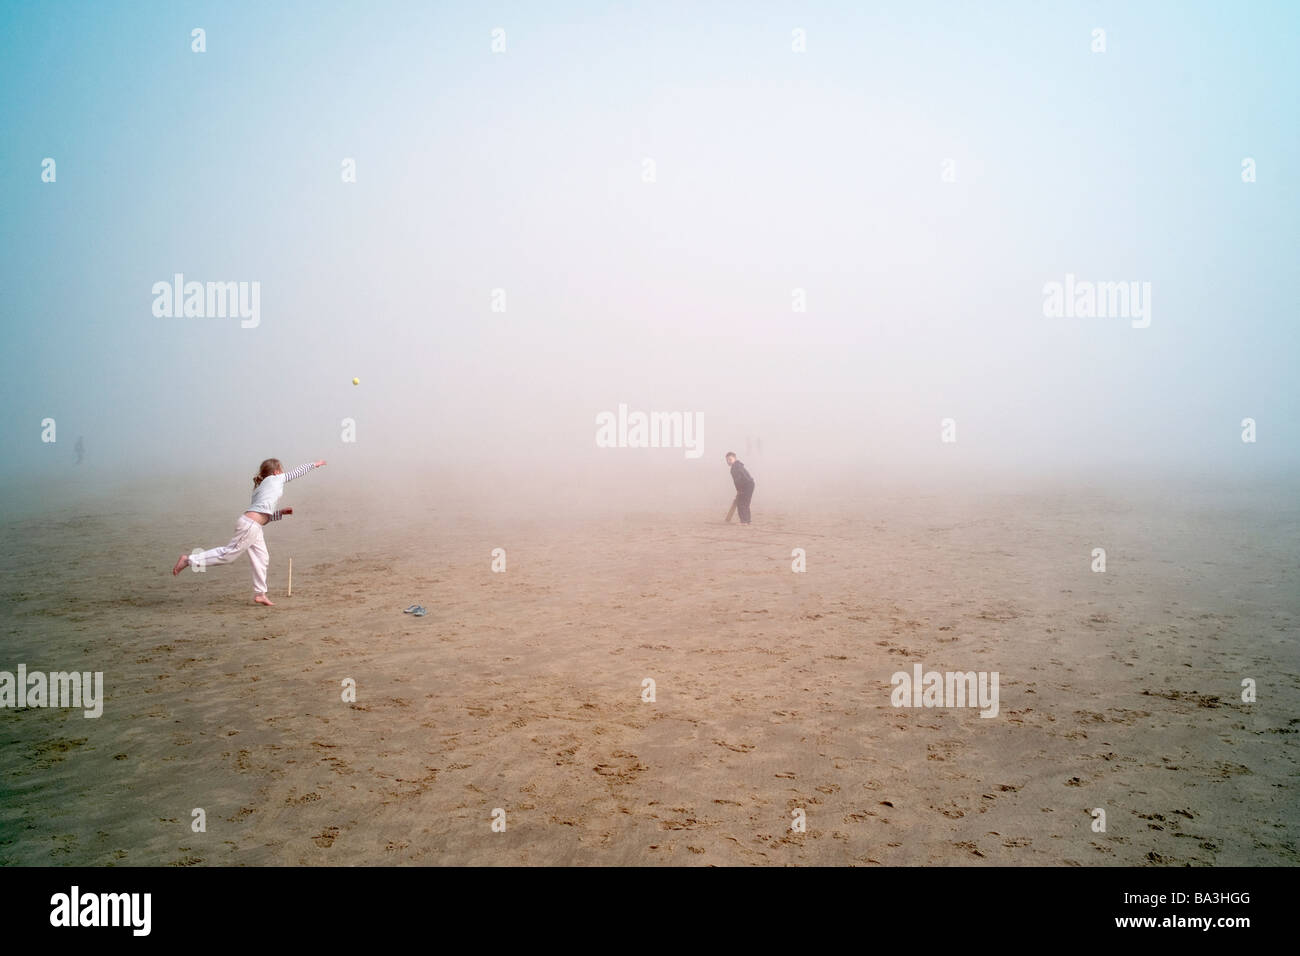 Children playing cricket on a fog bound beach in South East England Stock Photo